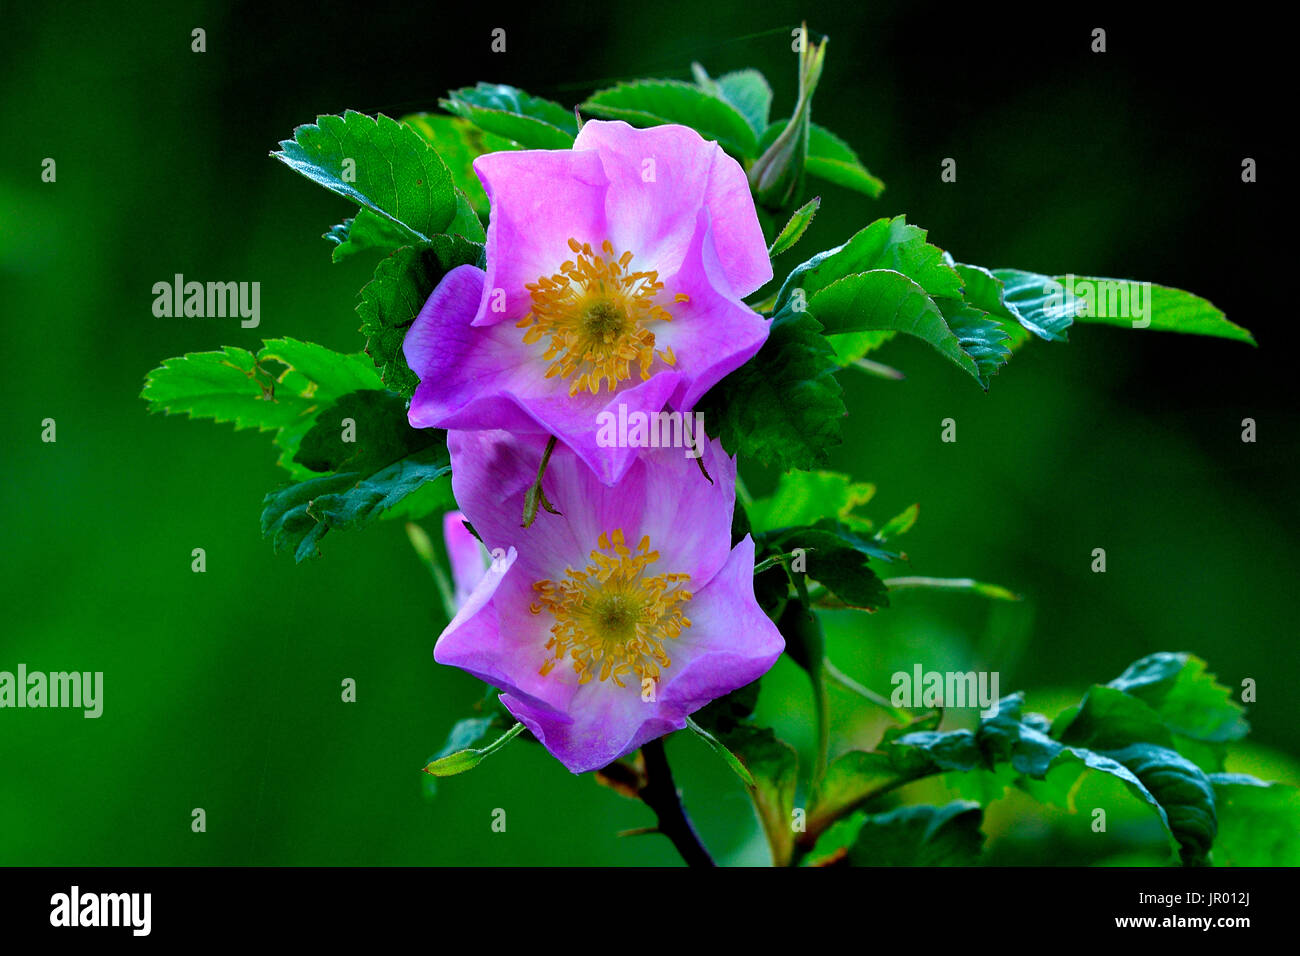 A wild rose bush with deep pink colored blossoms on a green leaf background in rural Alberta Canada Stock Photo